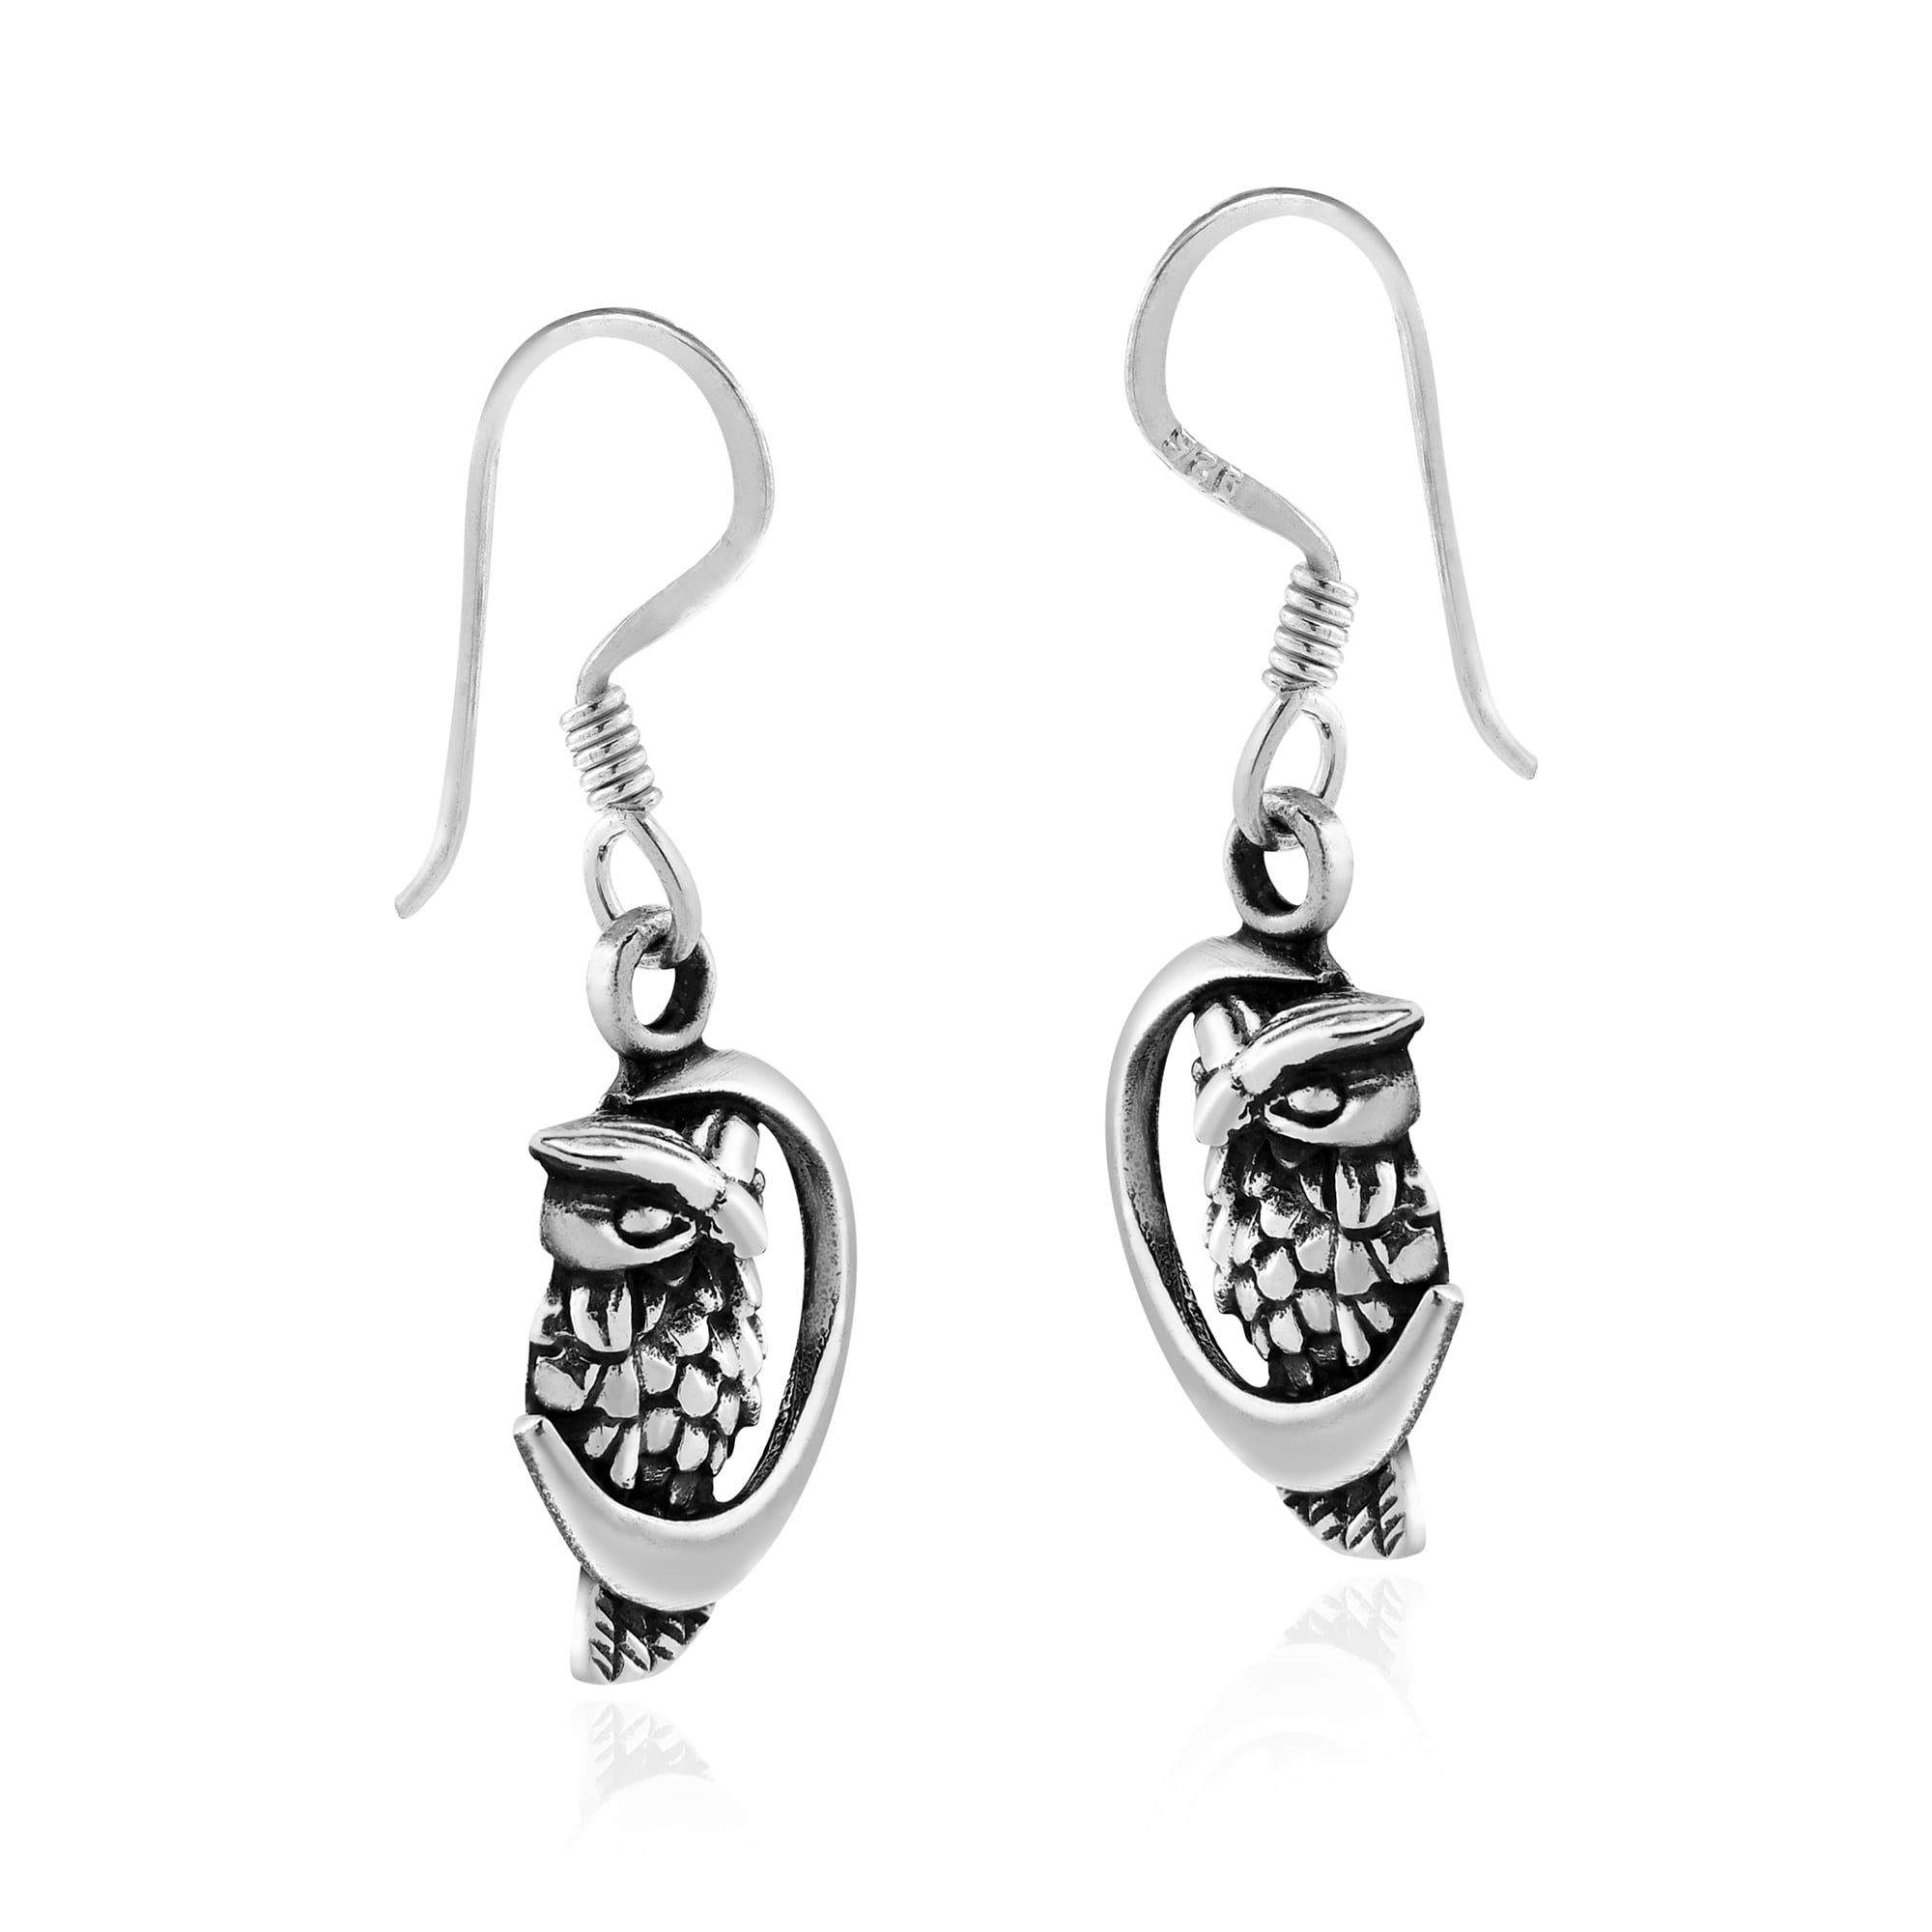 Intuitive Owl Perched on the Crescent Moon Sterling Silver Dangle Earrings 